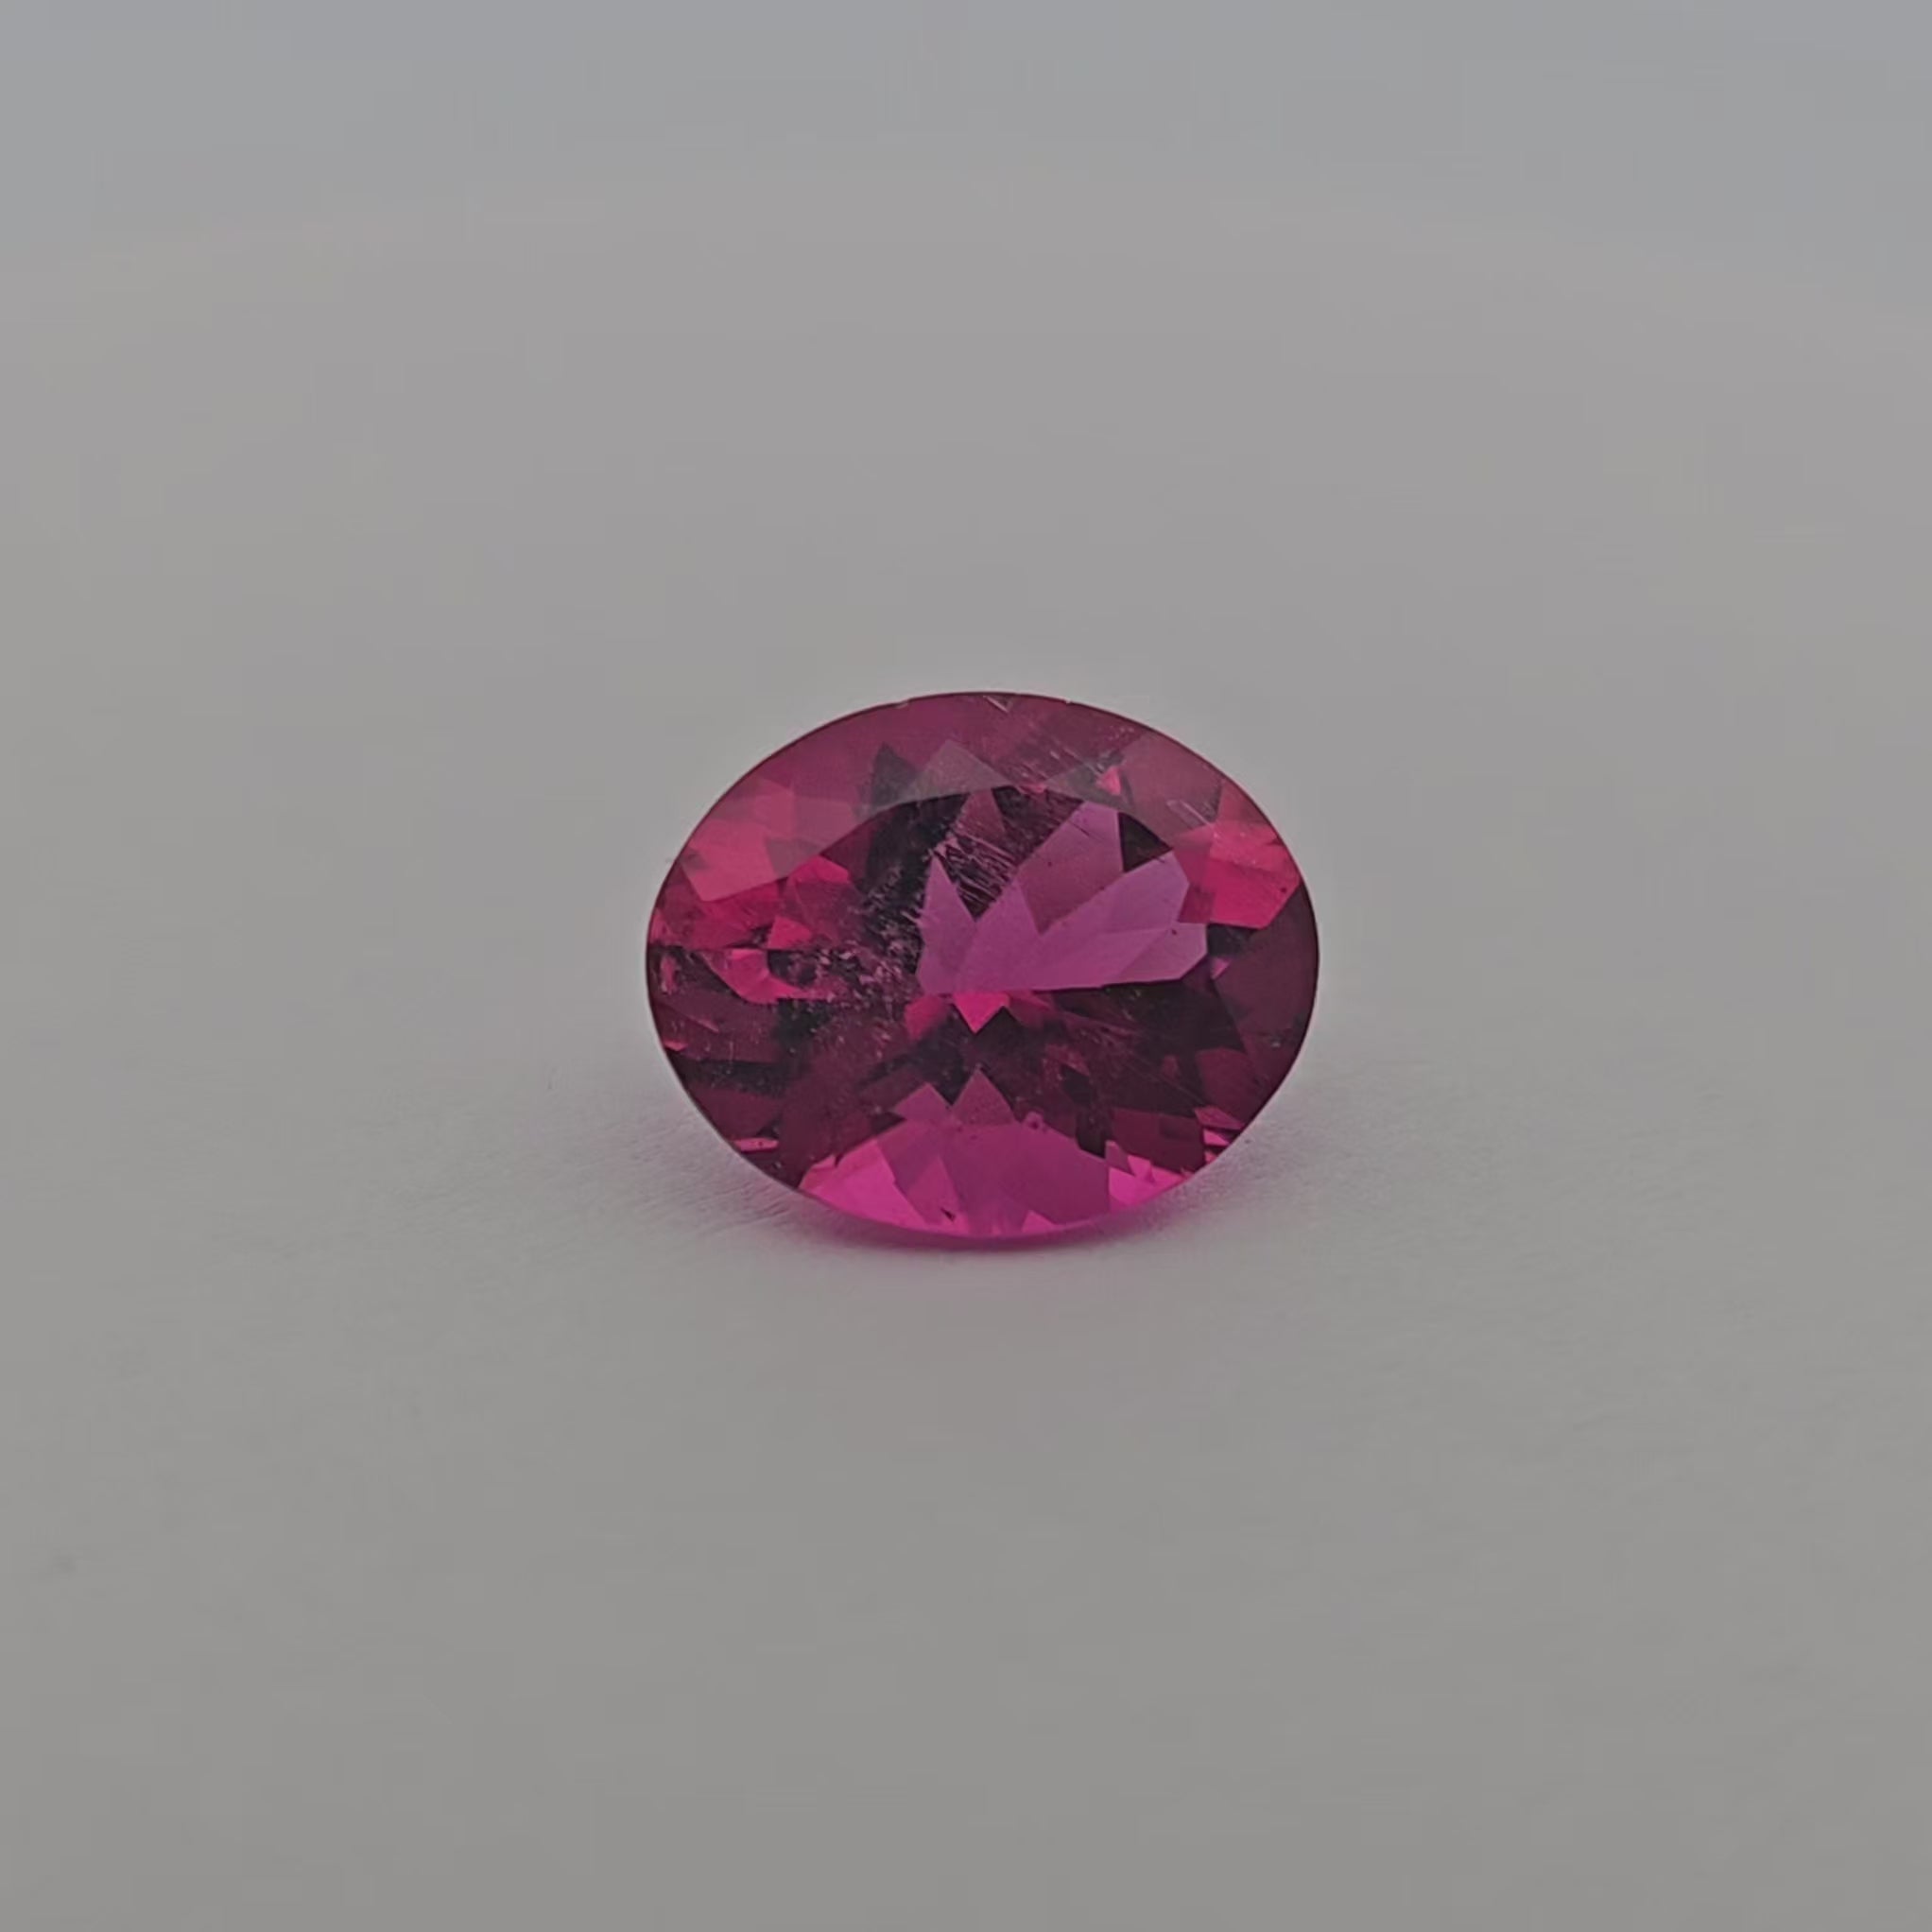 loose Natural Pink Rubellite Tourmaline Stone 3.97 Carats Oval Shape (11.8 x 9.8  mm)